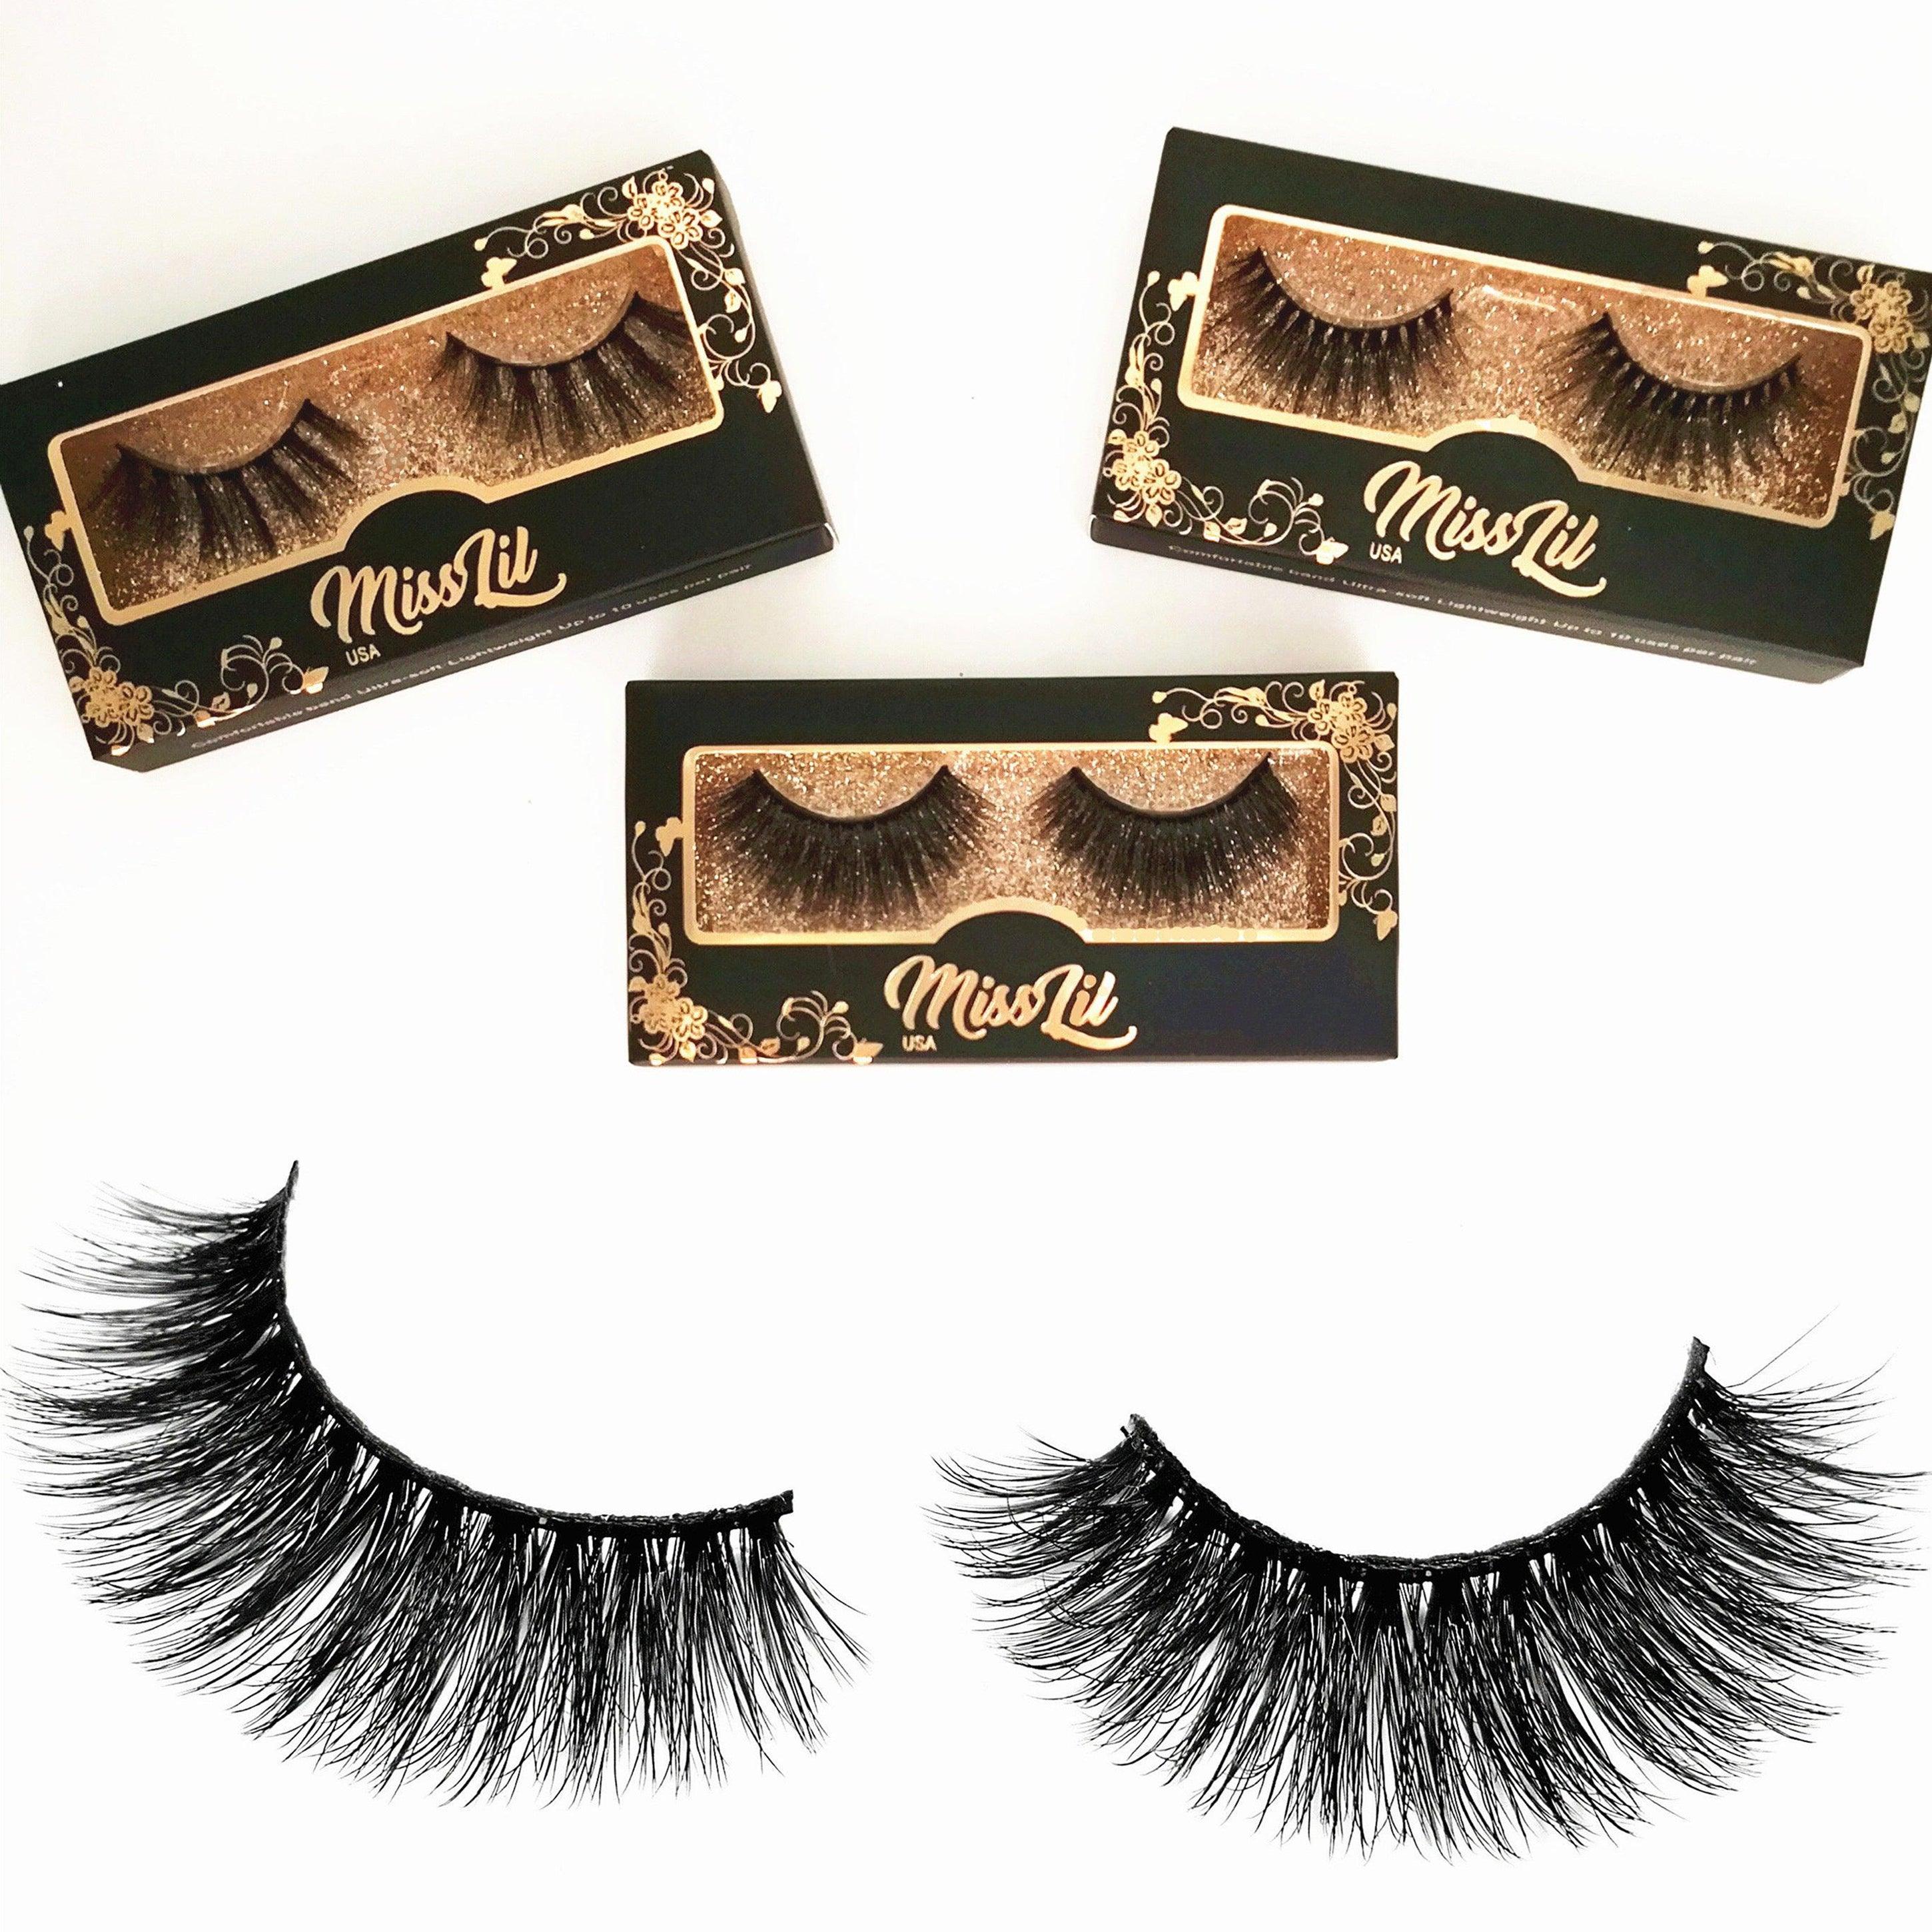 1-Pair Miss Lil USA Lashes #53 (Pack of 12) - Miss Lil USA Wholesale